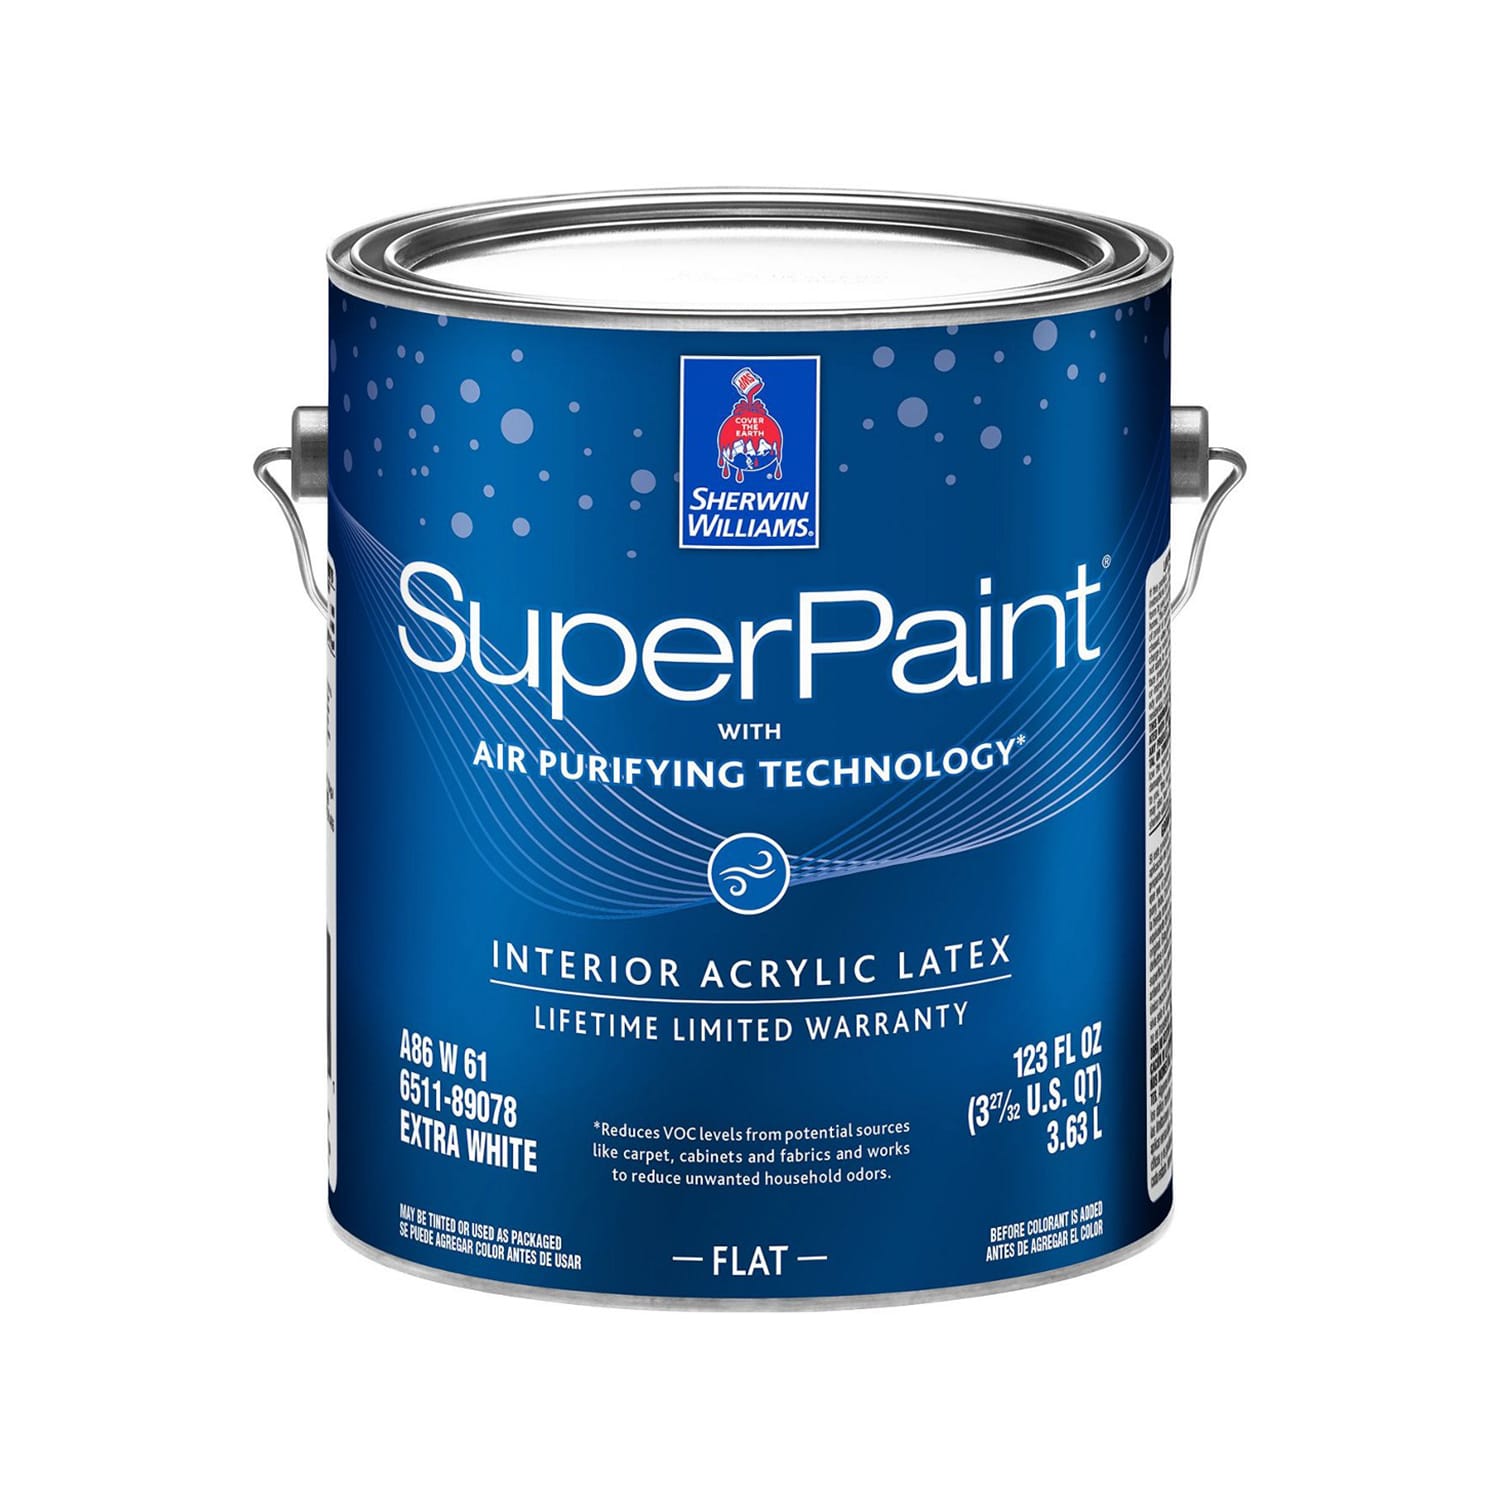 The Best Zero VOC & Non-Toxic Paints for an Eco-Friendly Home — The Honest  Consumer